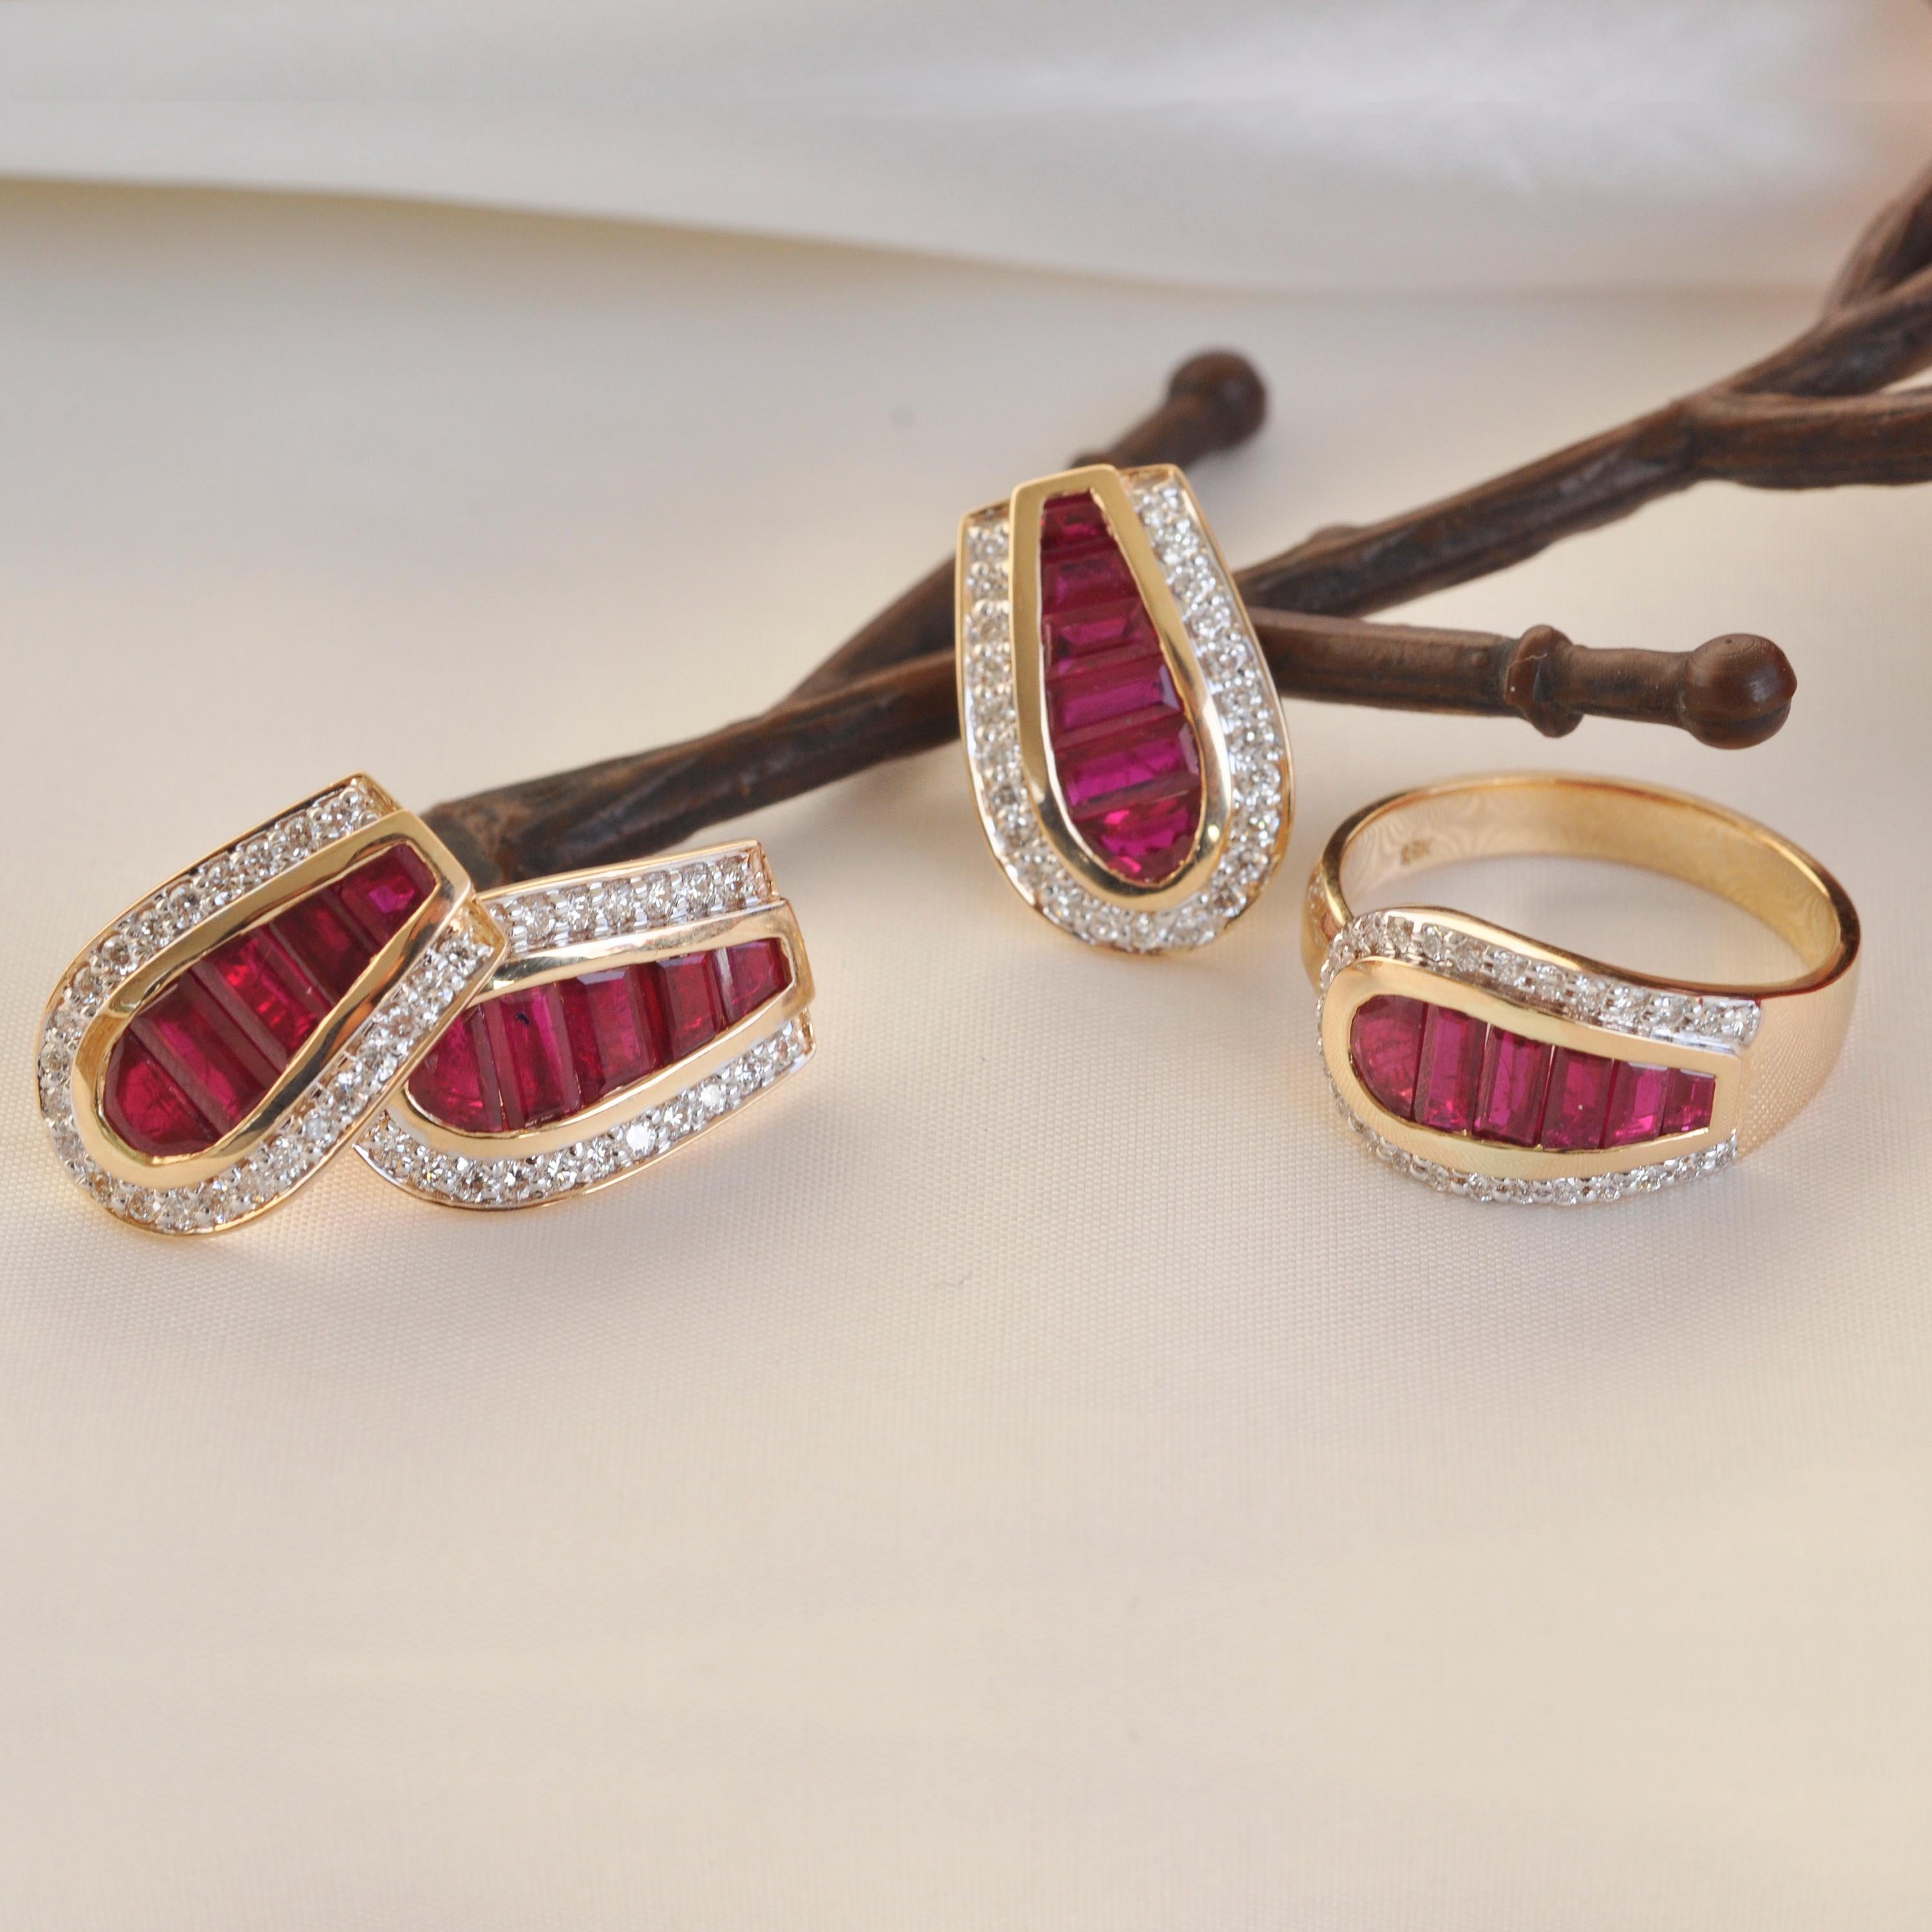 18 karat gold diamond burma ruby baguette pendant necklace earrings ring set.

Presenting a 18 karat gold art deco channel set ruby baguette diamond pendant necklace, earrings and ring. The burma ruby baguettes are meticulously handpicked after